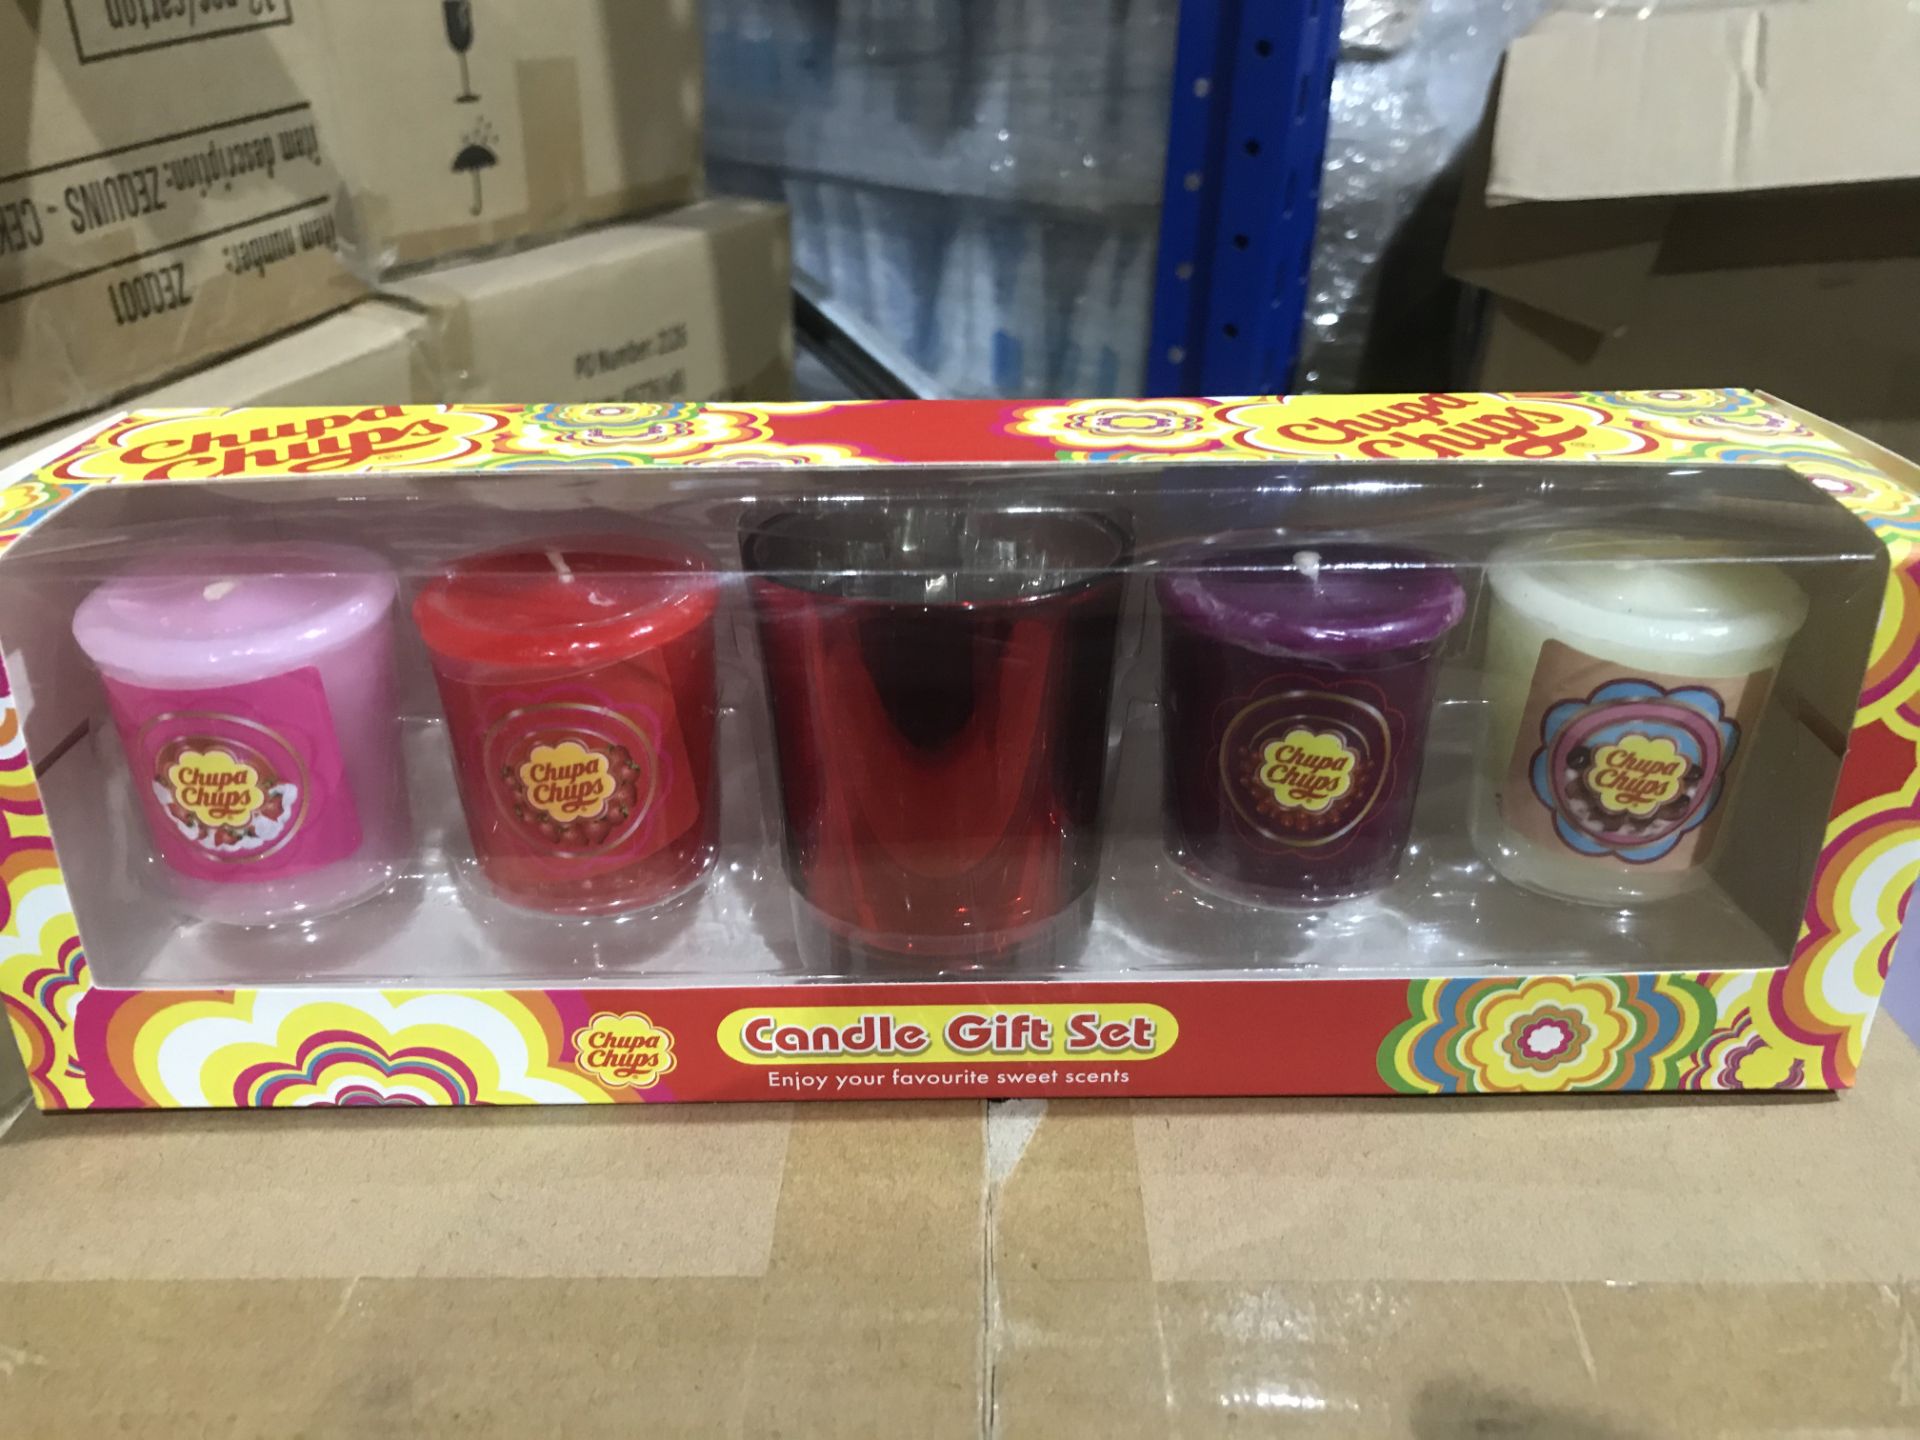 4 X BRAND NEW CHUPA CHUPS 5 PIECE CANDLE GIFT SETS